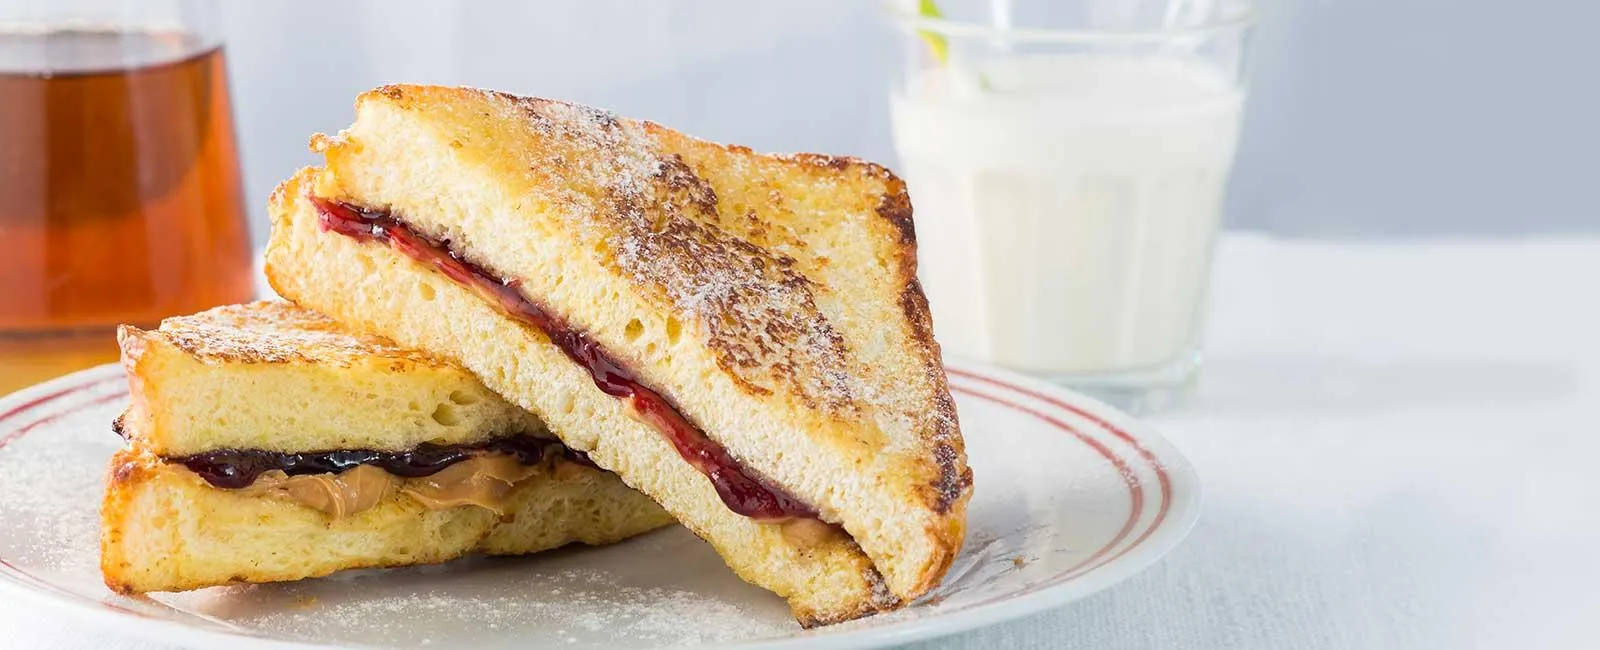 Peanut Butter and Jelly Stuffed French Toast 